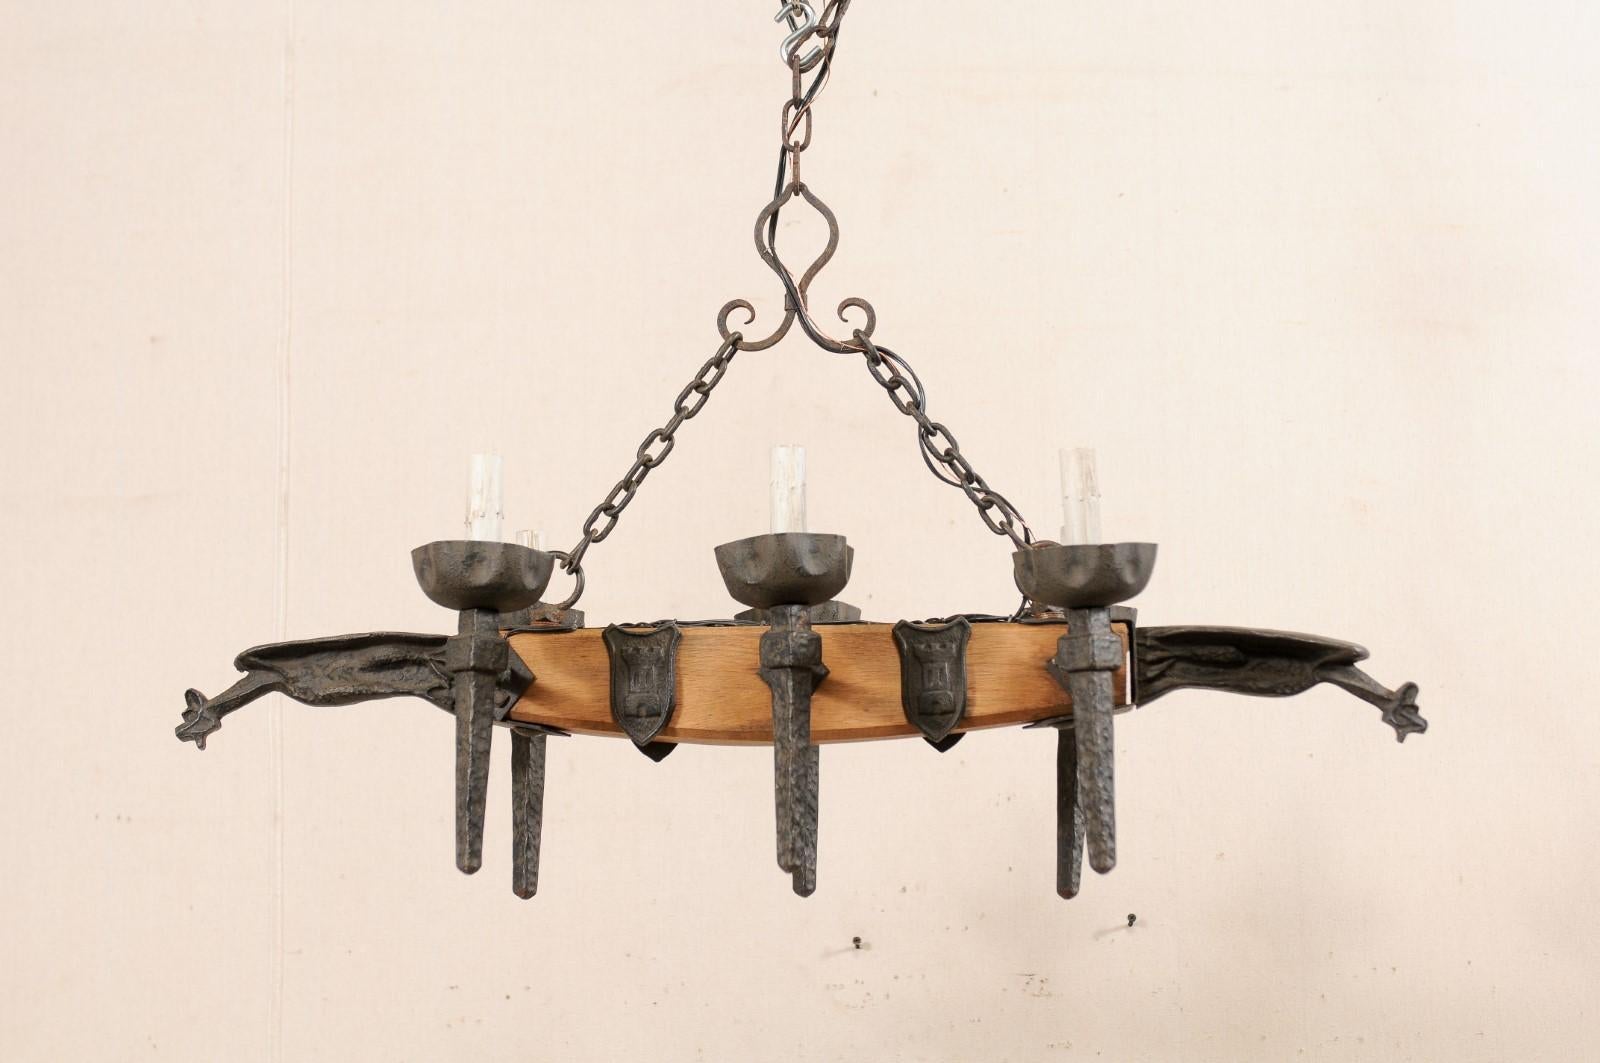 A French six-light wooden and iron chandelier with gargoyle motif from the mid-20th century. This vintage French chandelier has a central wooden beam with six torch-style iron arms, three at each opposing side. A pair of gaping mouthed, alert iron